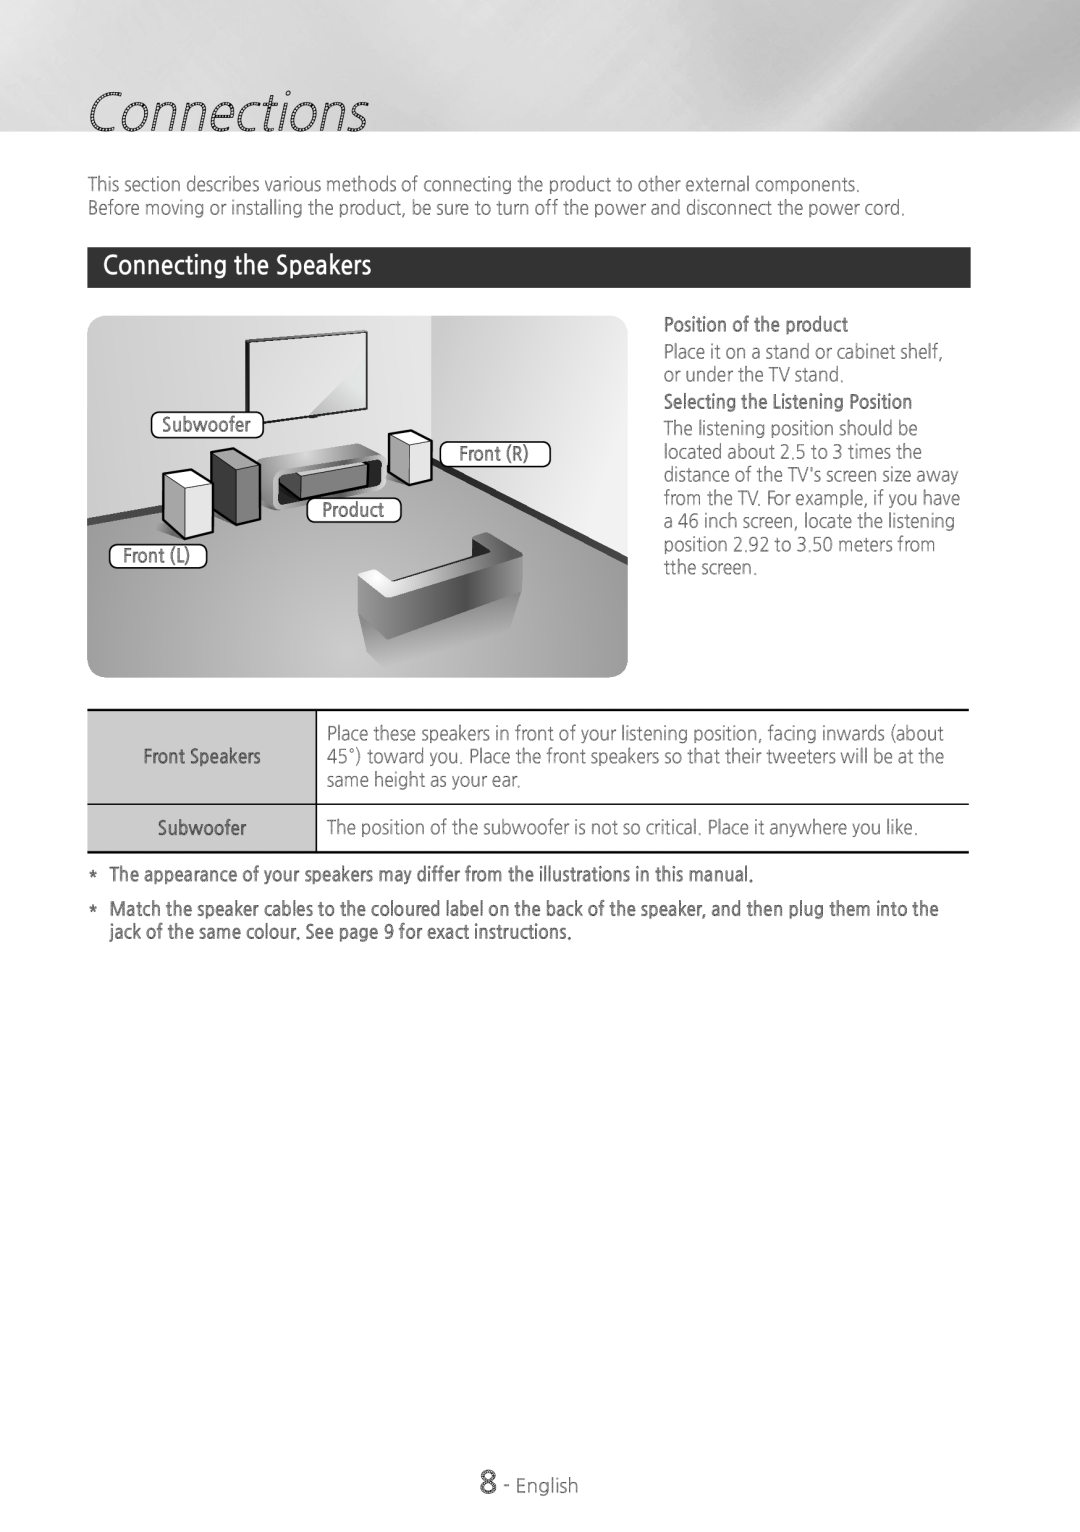 Samsung HT-H5200, HT-HS5200 user manual Connections, Connecting the Speakers 